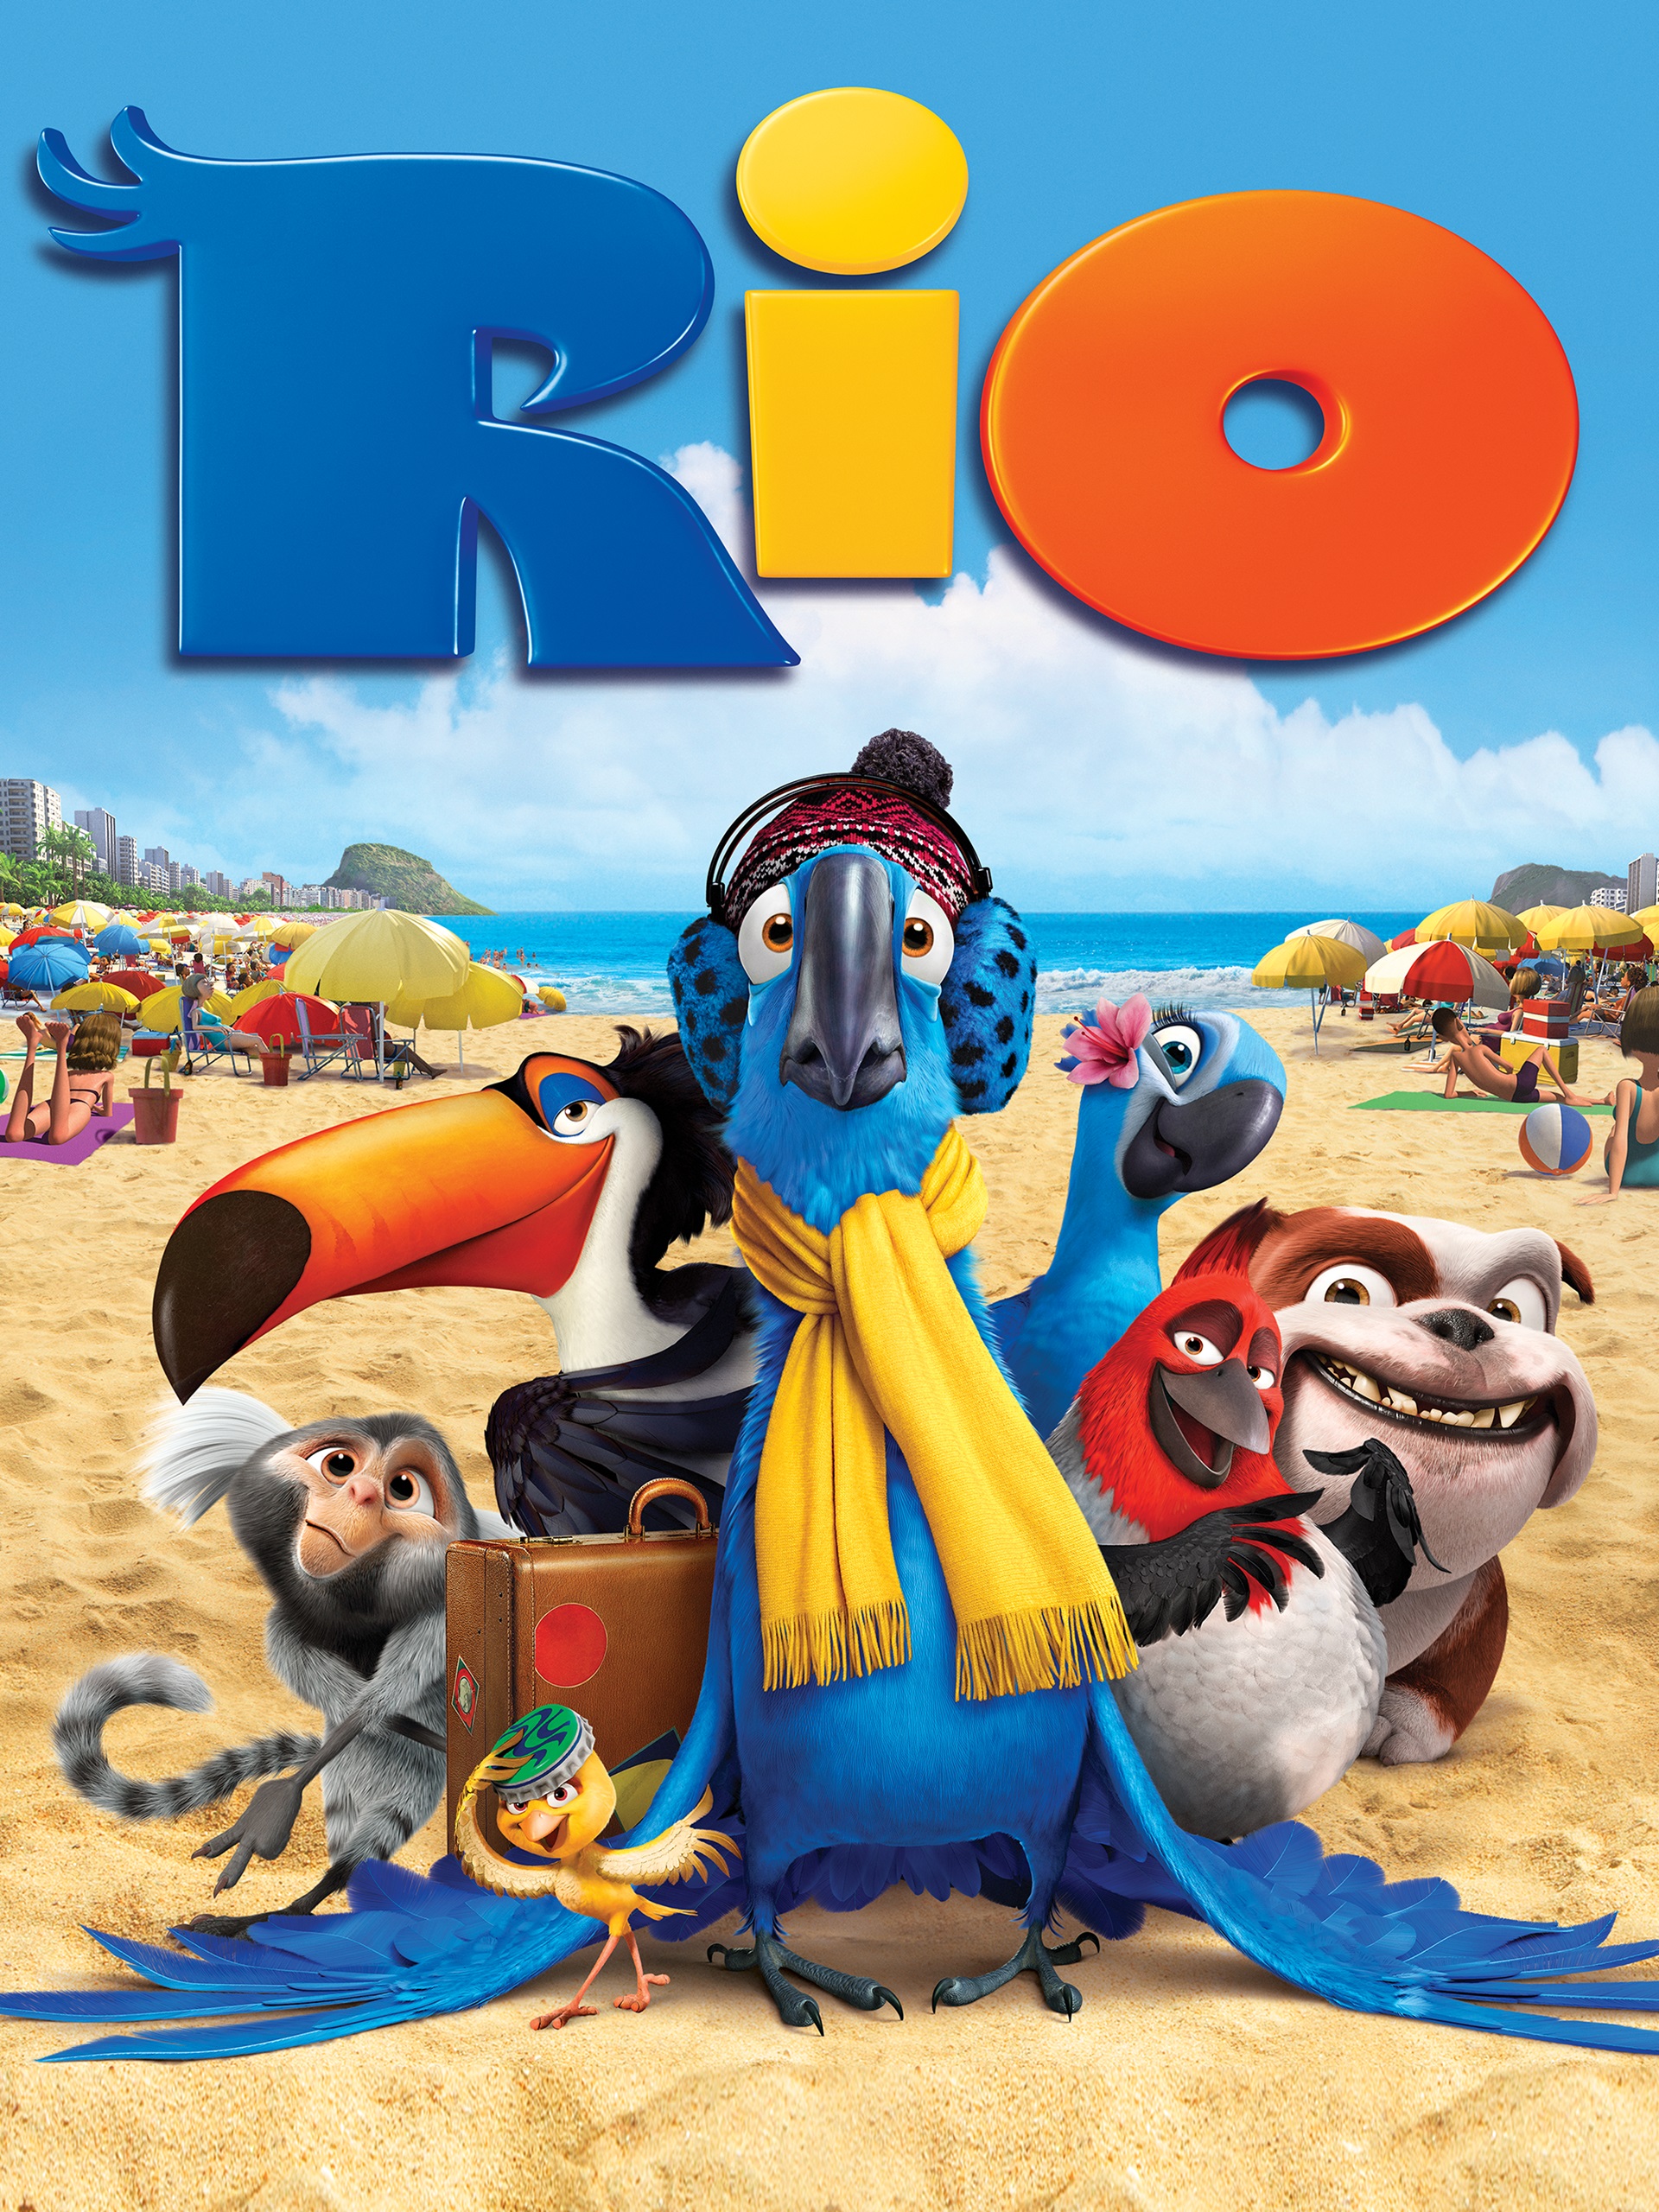 ariel starks recommends rio movie in hindi pic